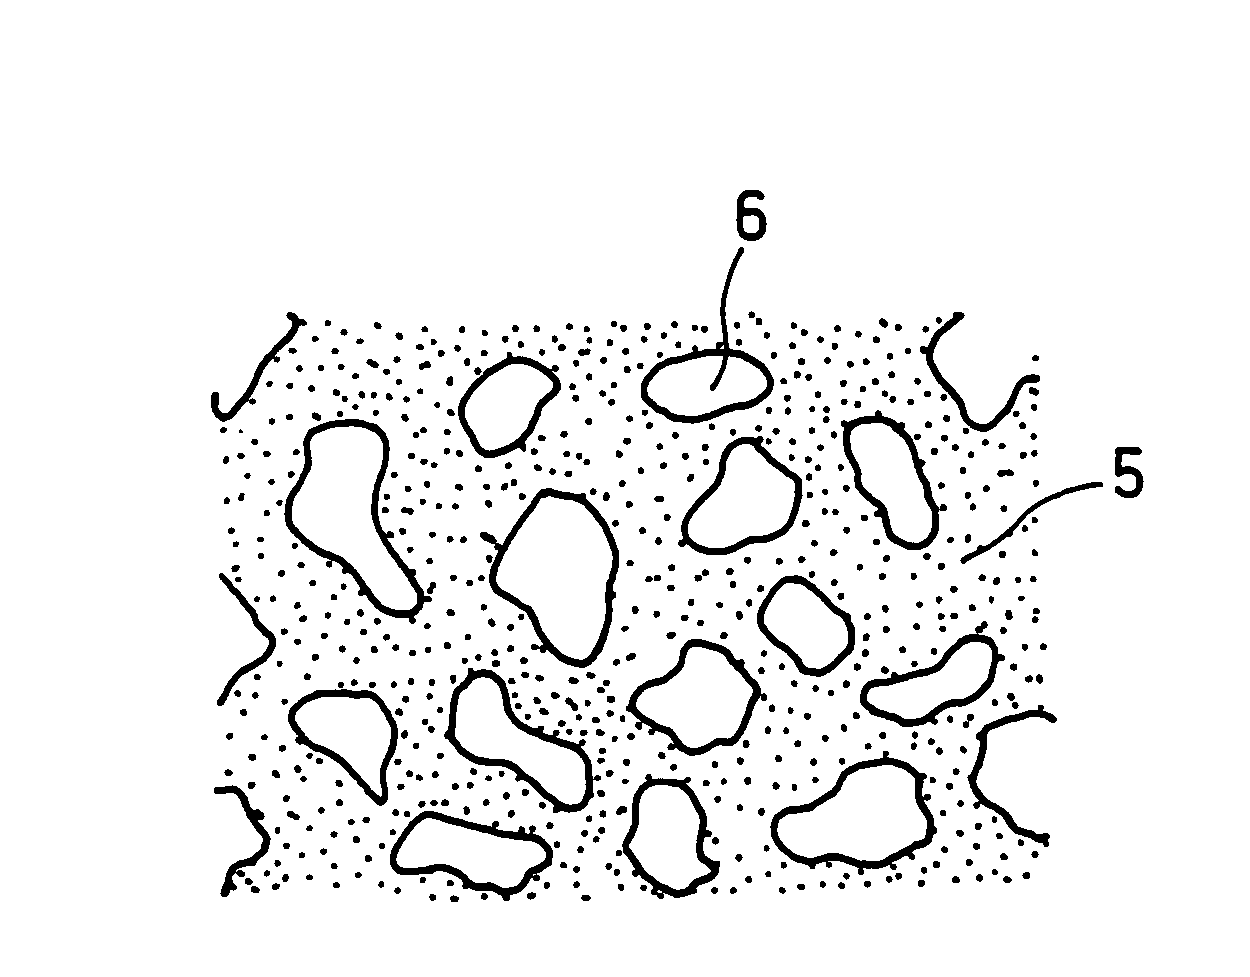 Electrode for lithium ion secondary batteries, lithium ion secondary battery using the same, and method for manufacturing the battery